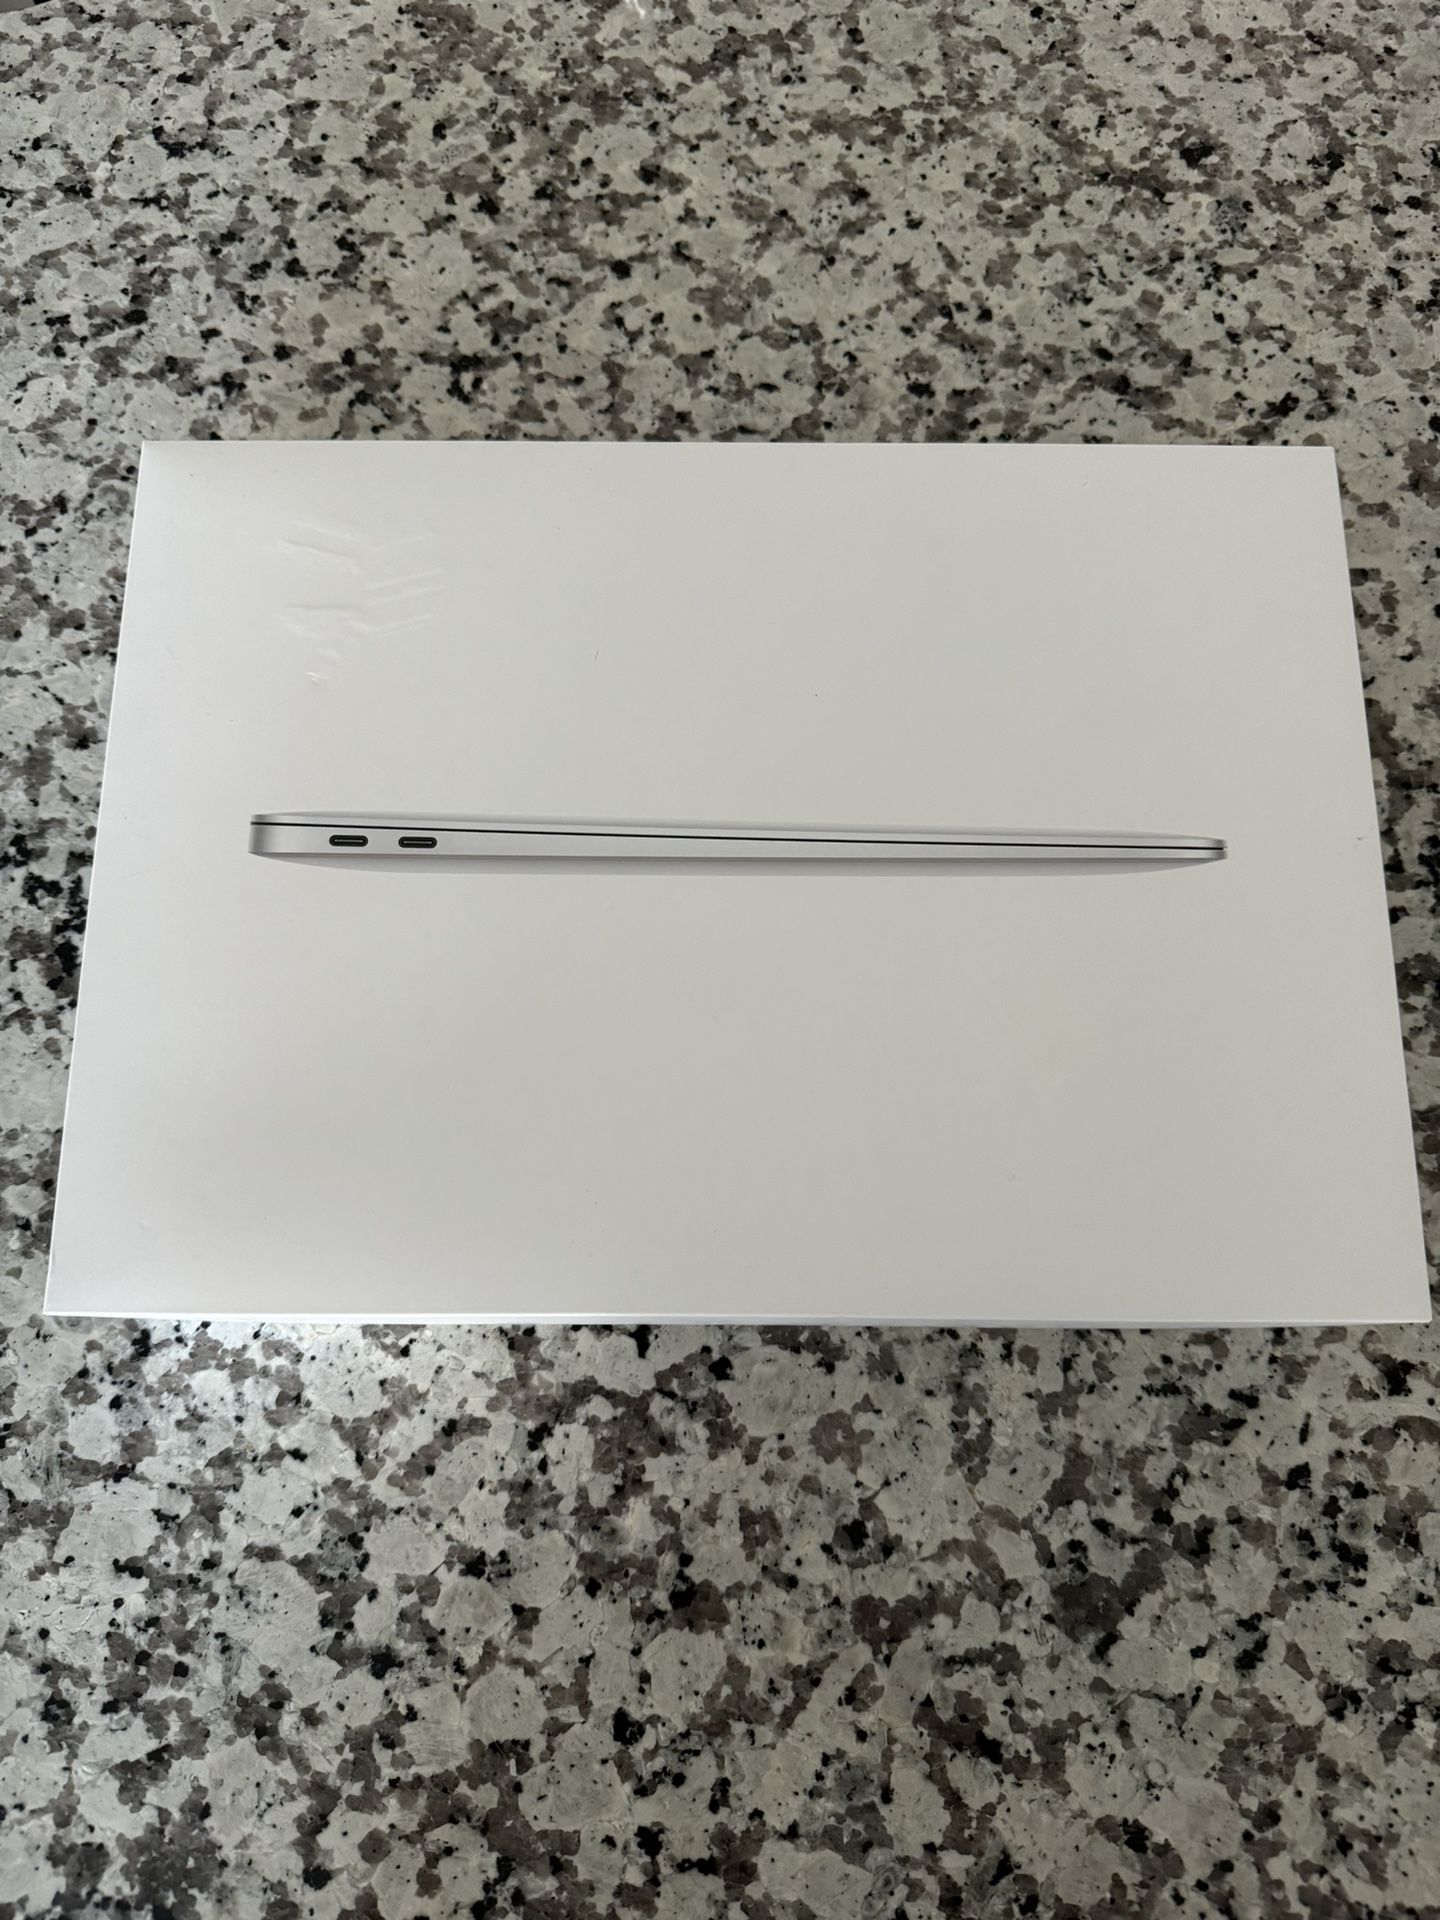 MacBook Air M1 Like New Condition